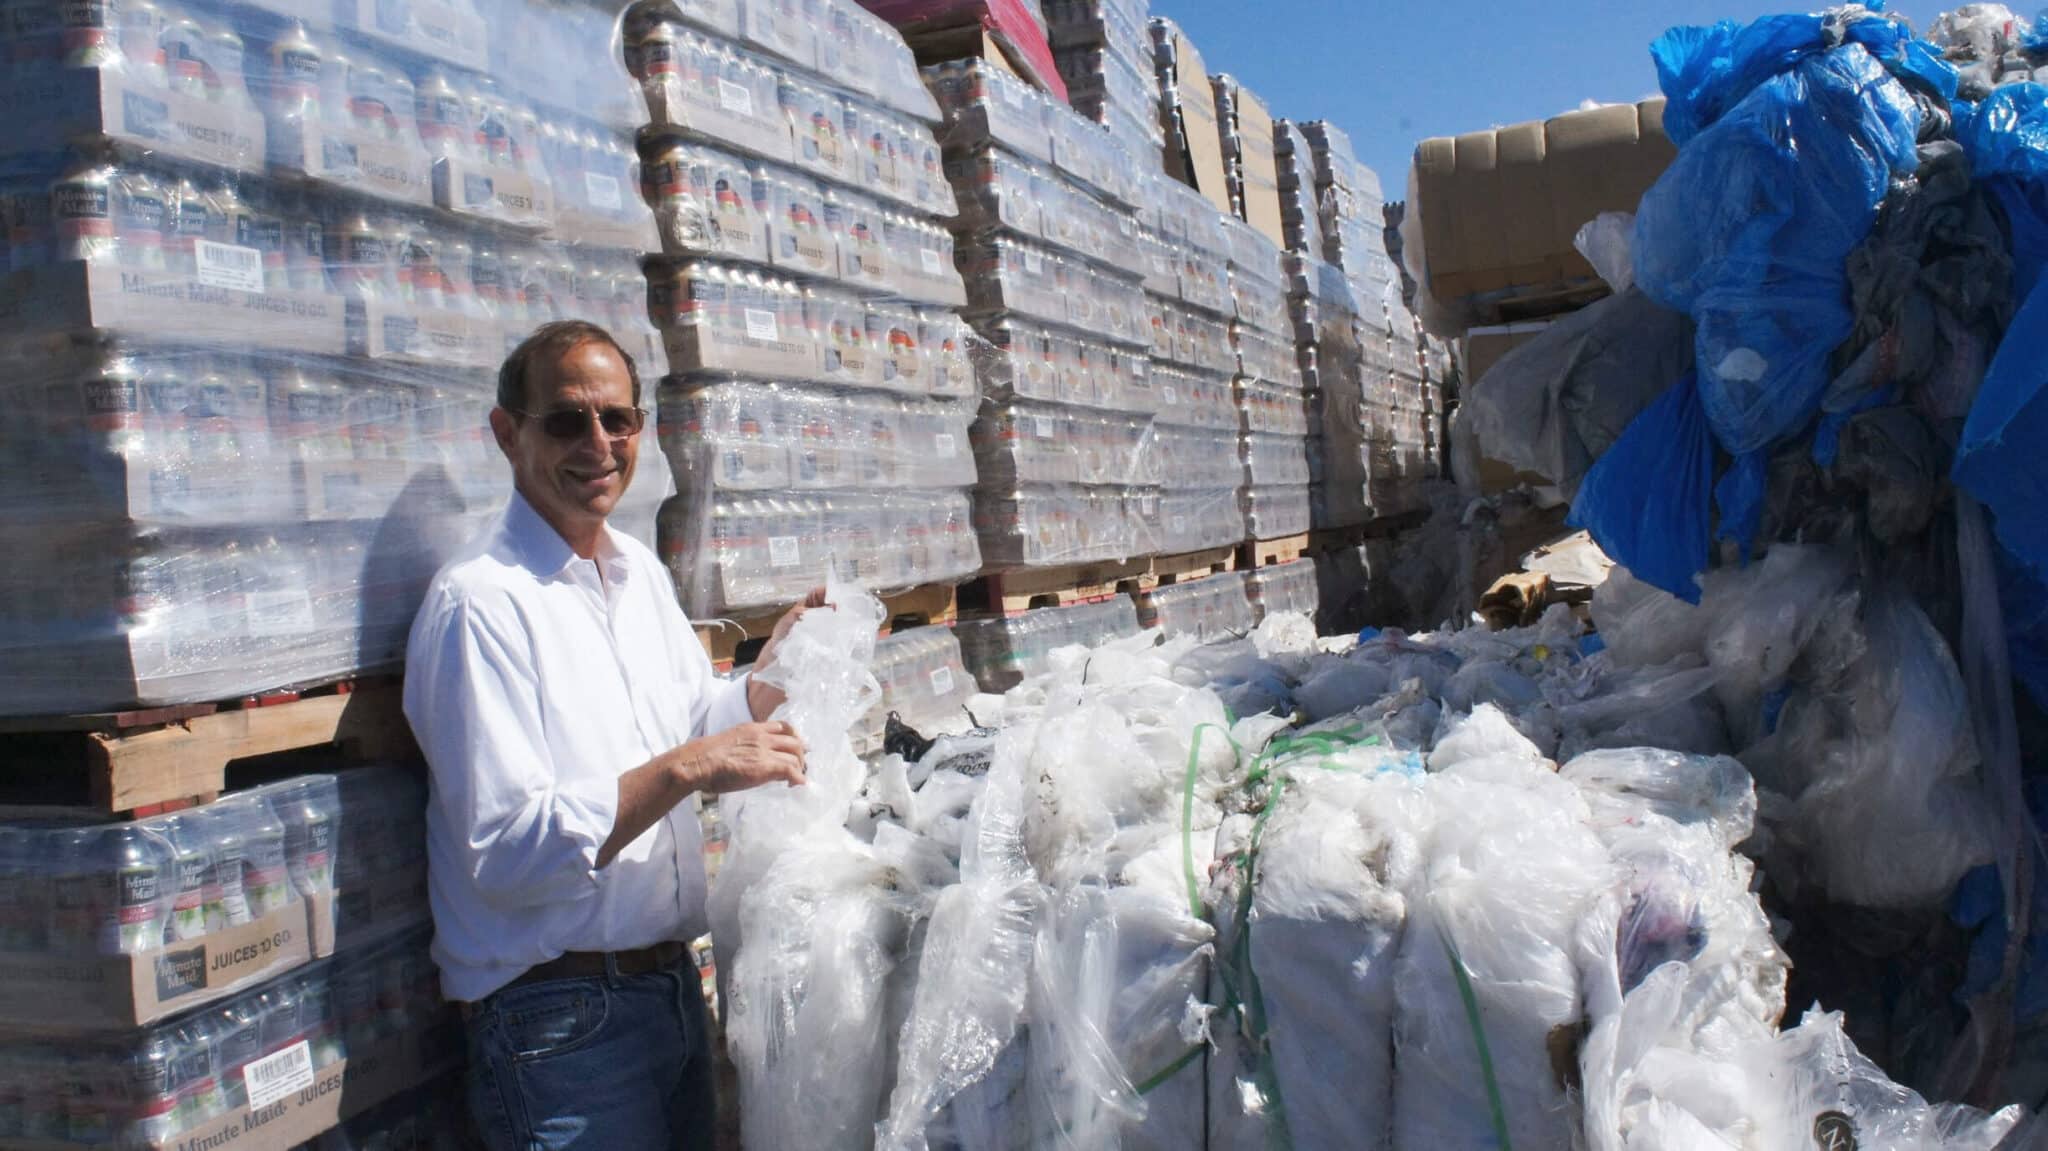 Steve Sutta in front of bulk palets of plastic bottles at recycling facility.